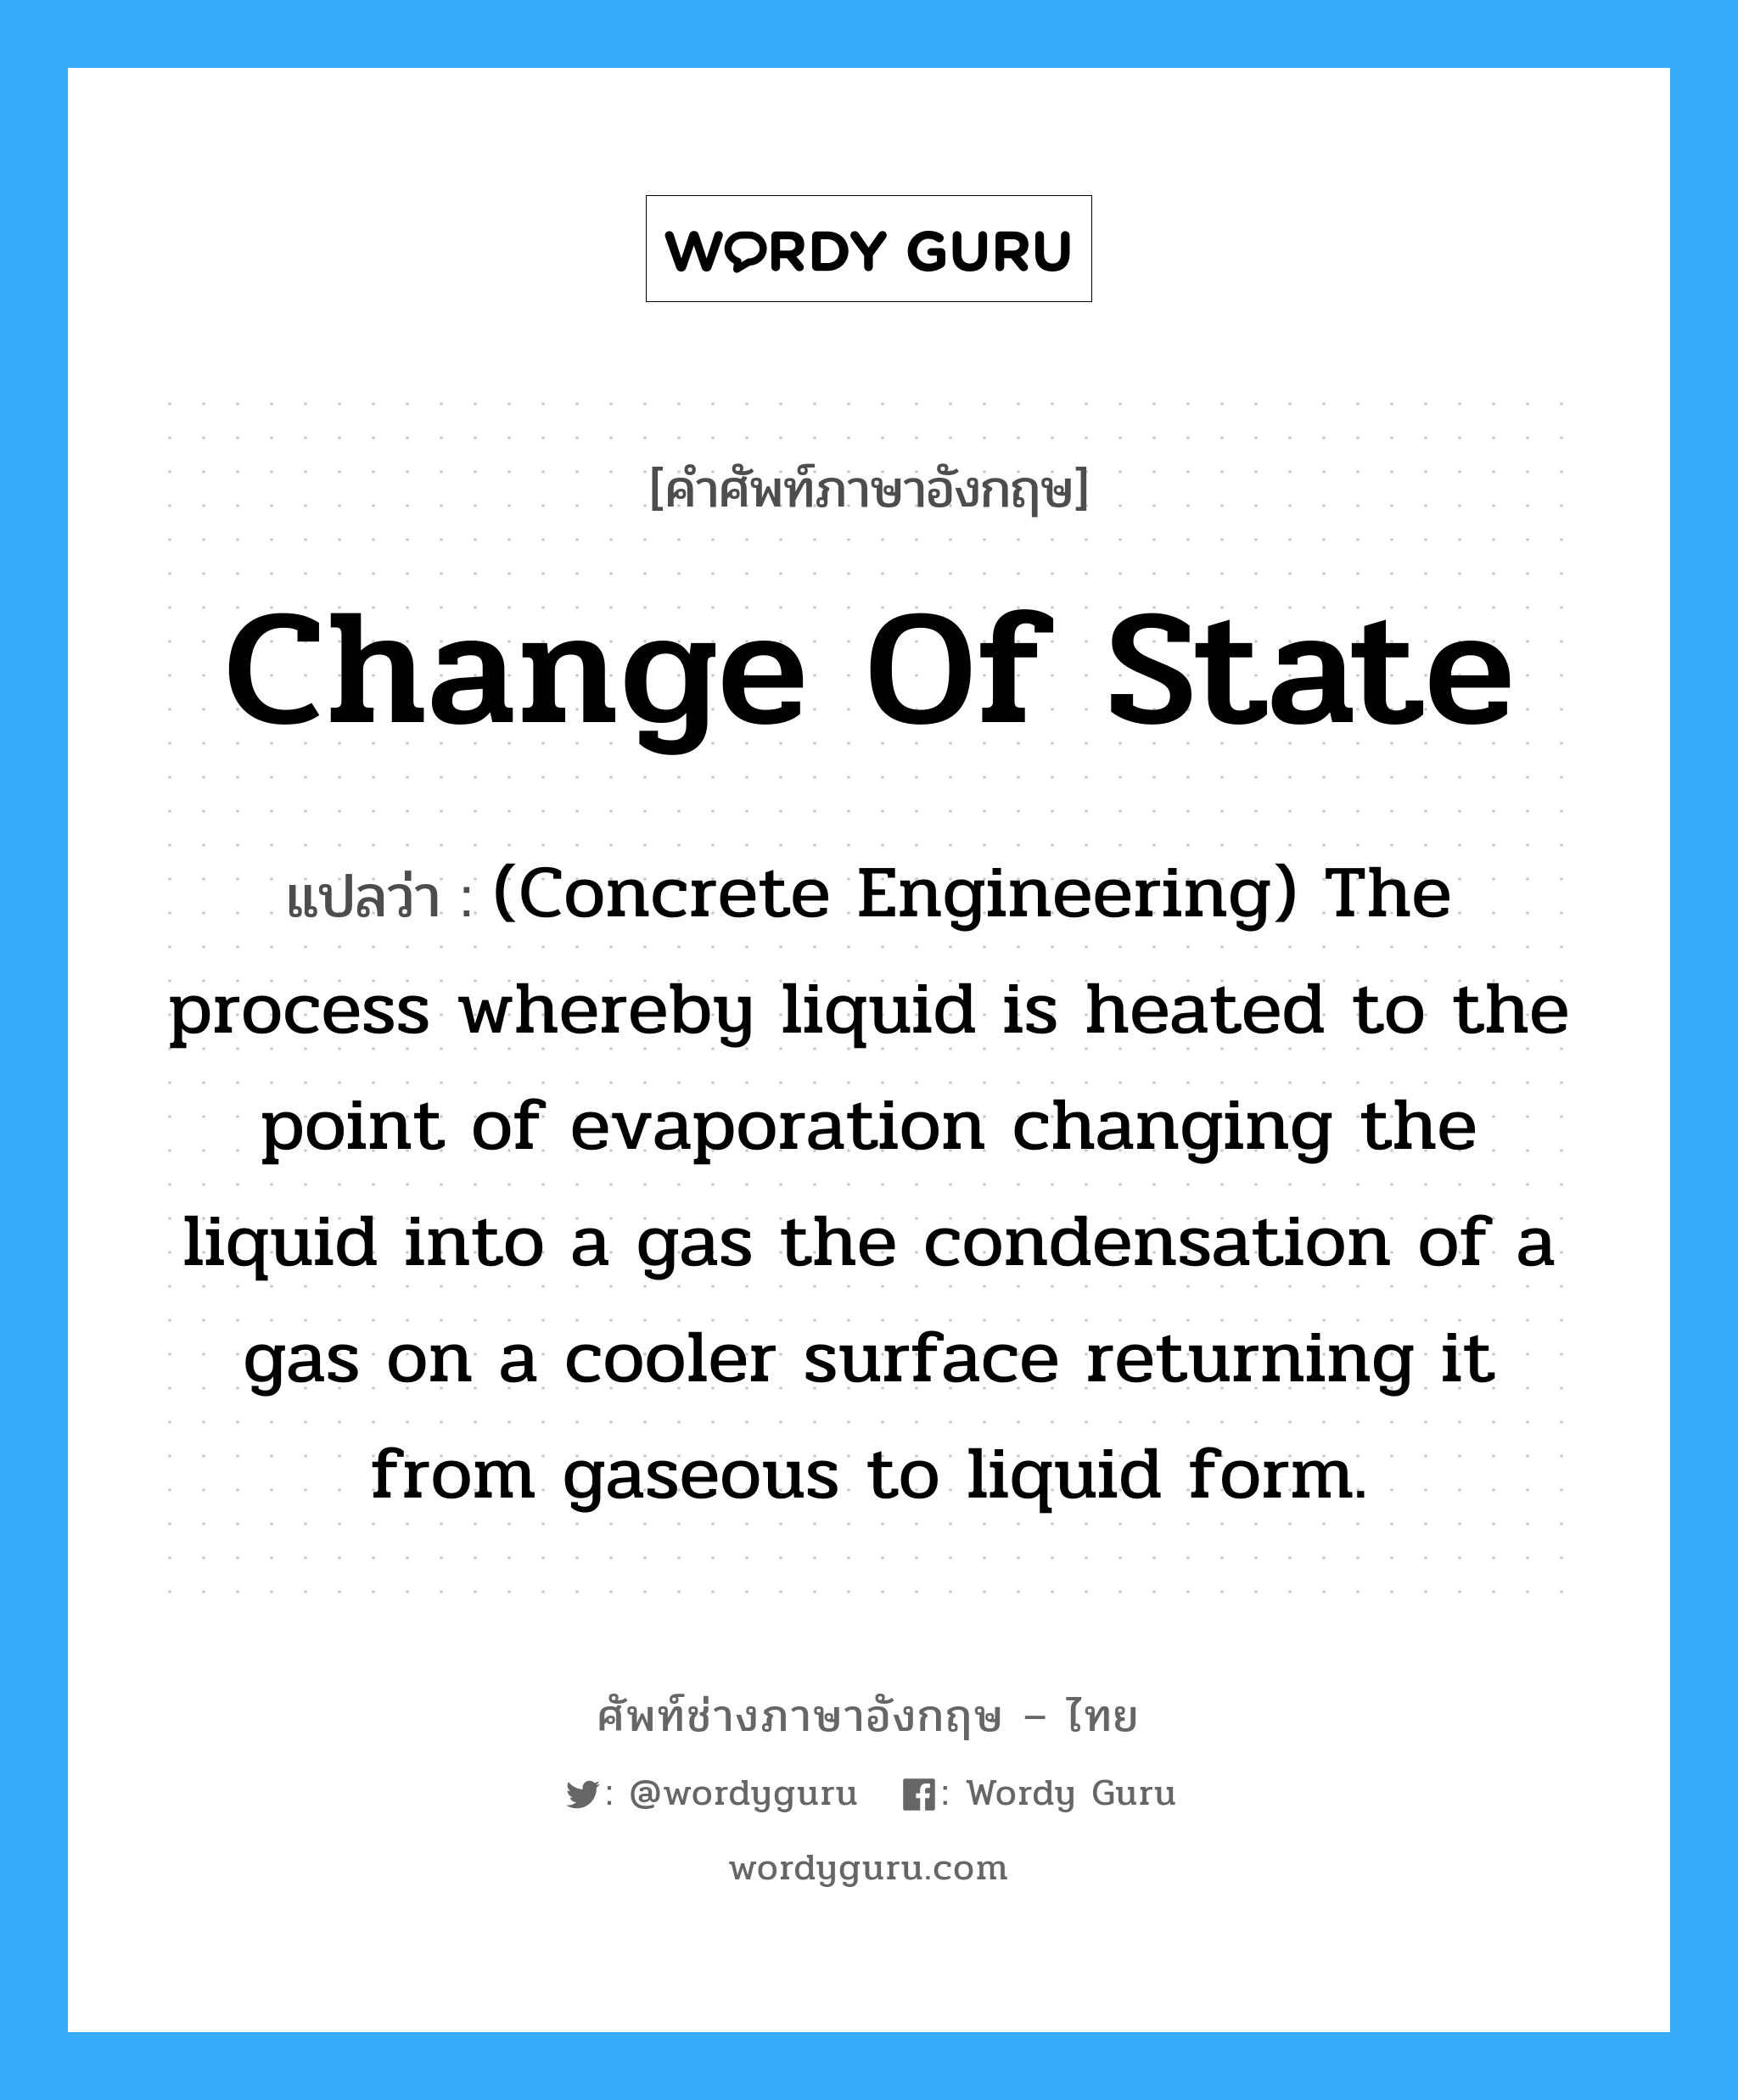 Change of State แปลว่า?, คำศัพท์ช่างภาษาอังกฤษ - ไทย Change of State คำศัพท์ภาษาอังกฤษ Change of State แปลว่า (Concrete Engineering) The process whereby liquid is heated to the point of evaporation changing the liquid into a gas the condensation of a gas on a cooler surface returning it from gaseous to liquid form.